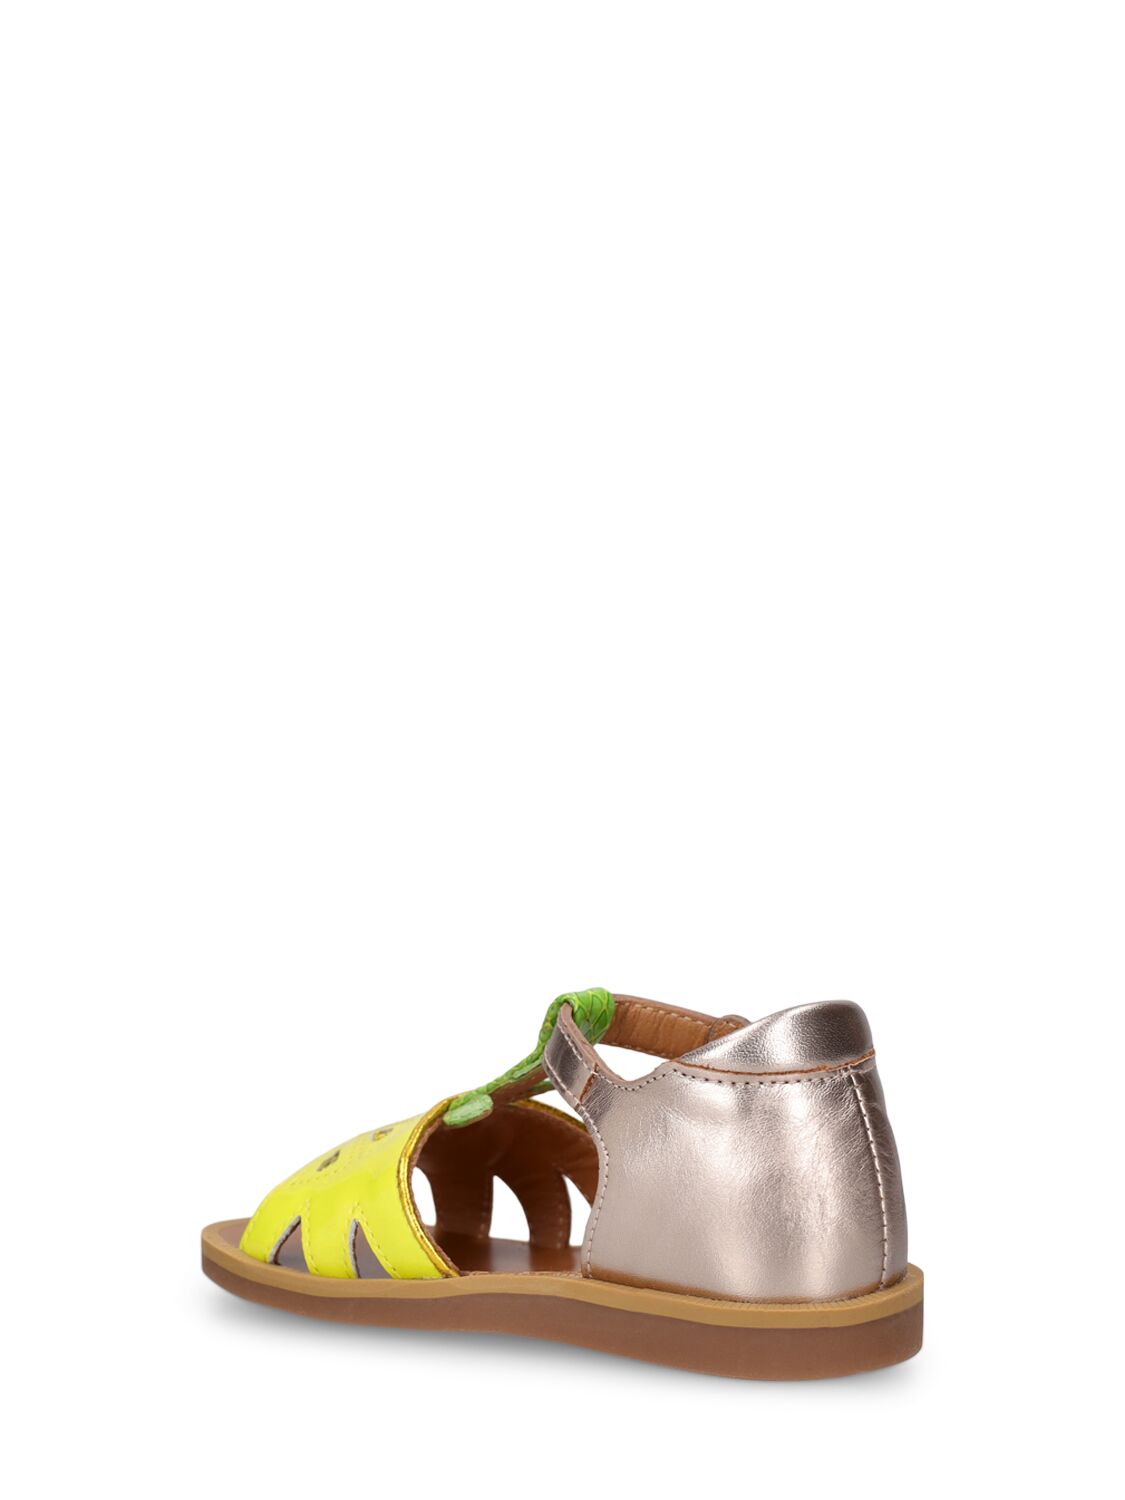 Shop Pom D'api Patent Leather Sandals W/ Flower In Yellow